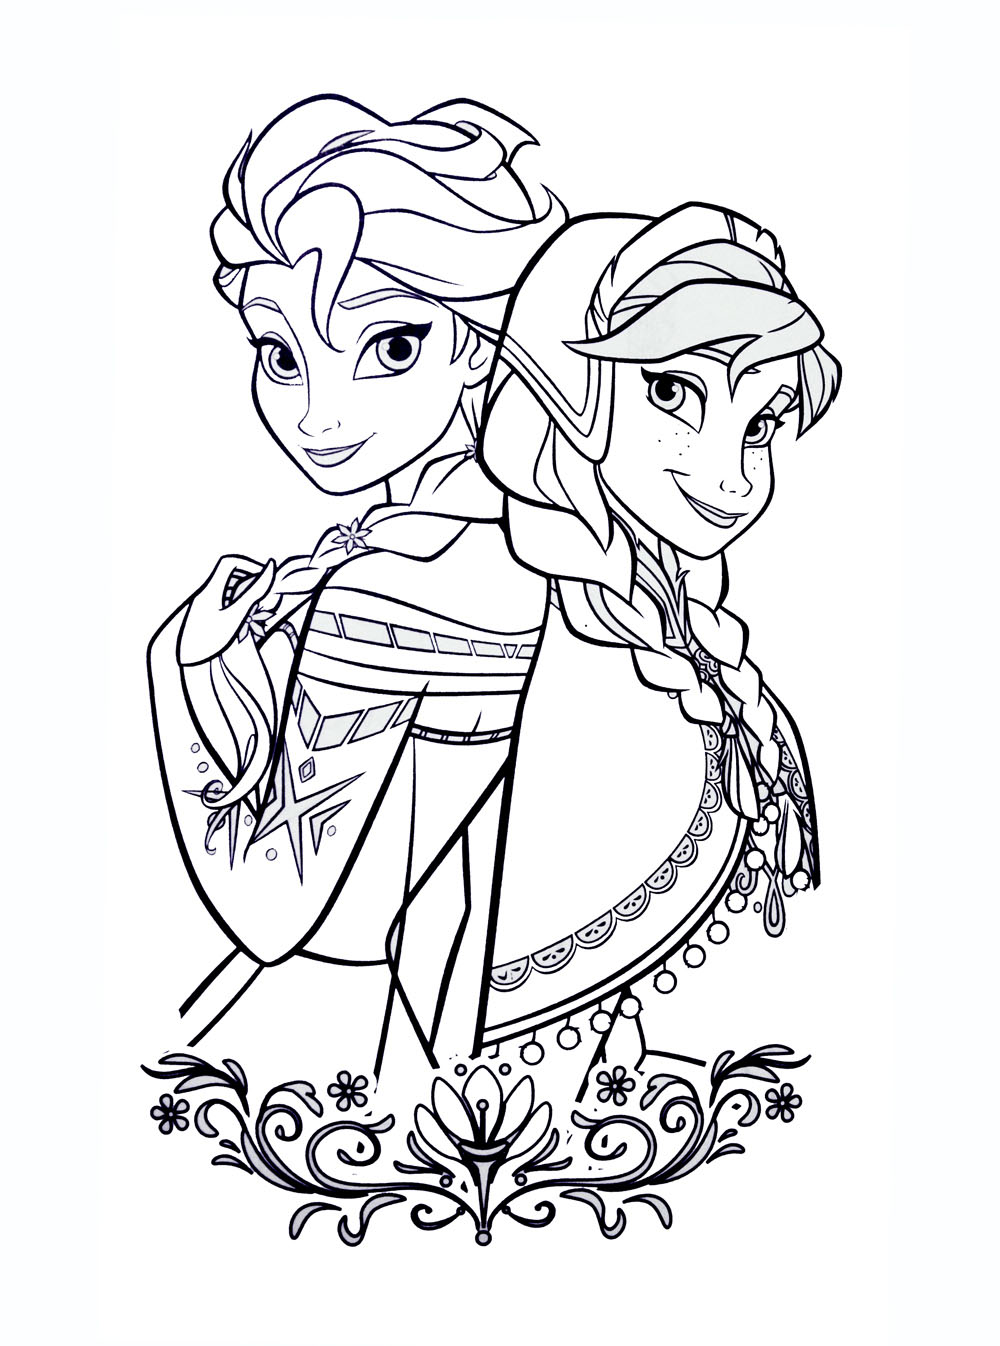 Download Frozen free to color for kids - Frozen Kids Coloring Pages